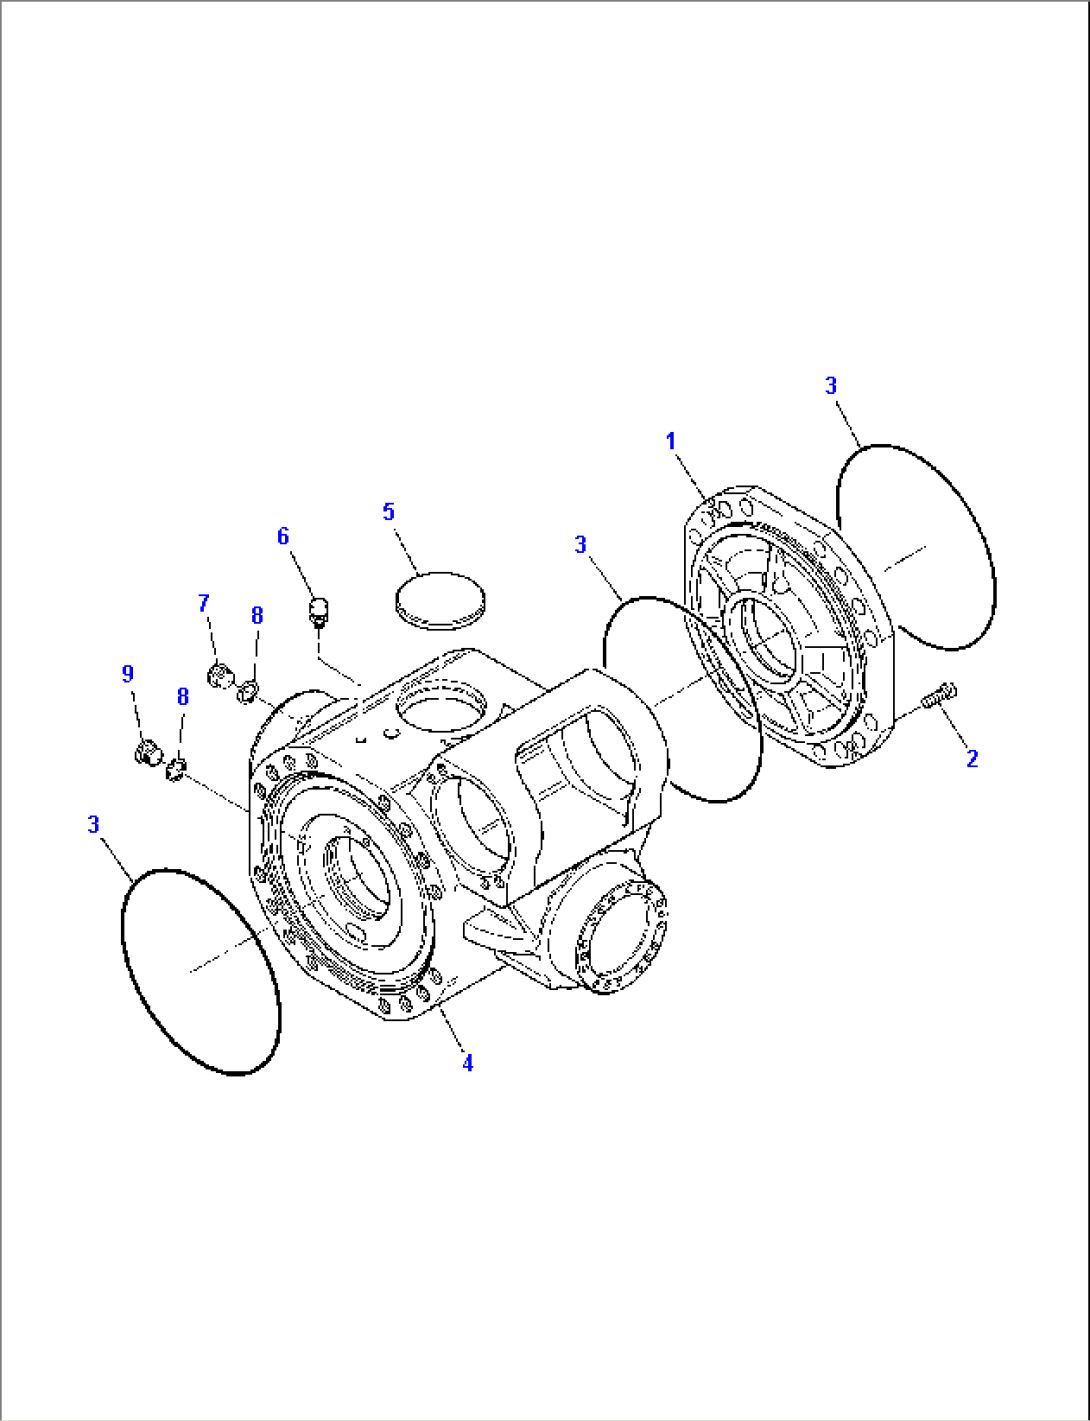 FRONT AXLE (1/6)